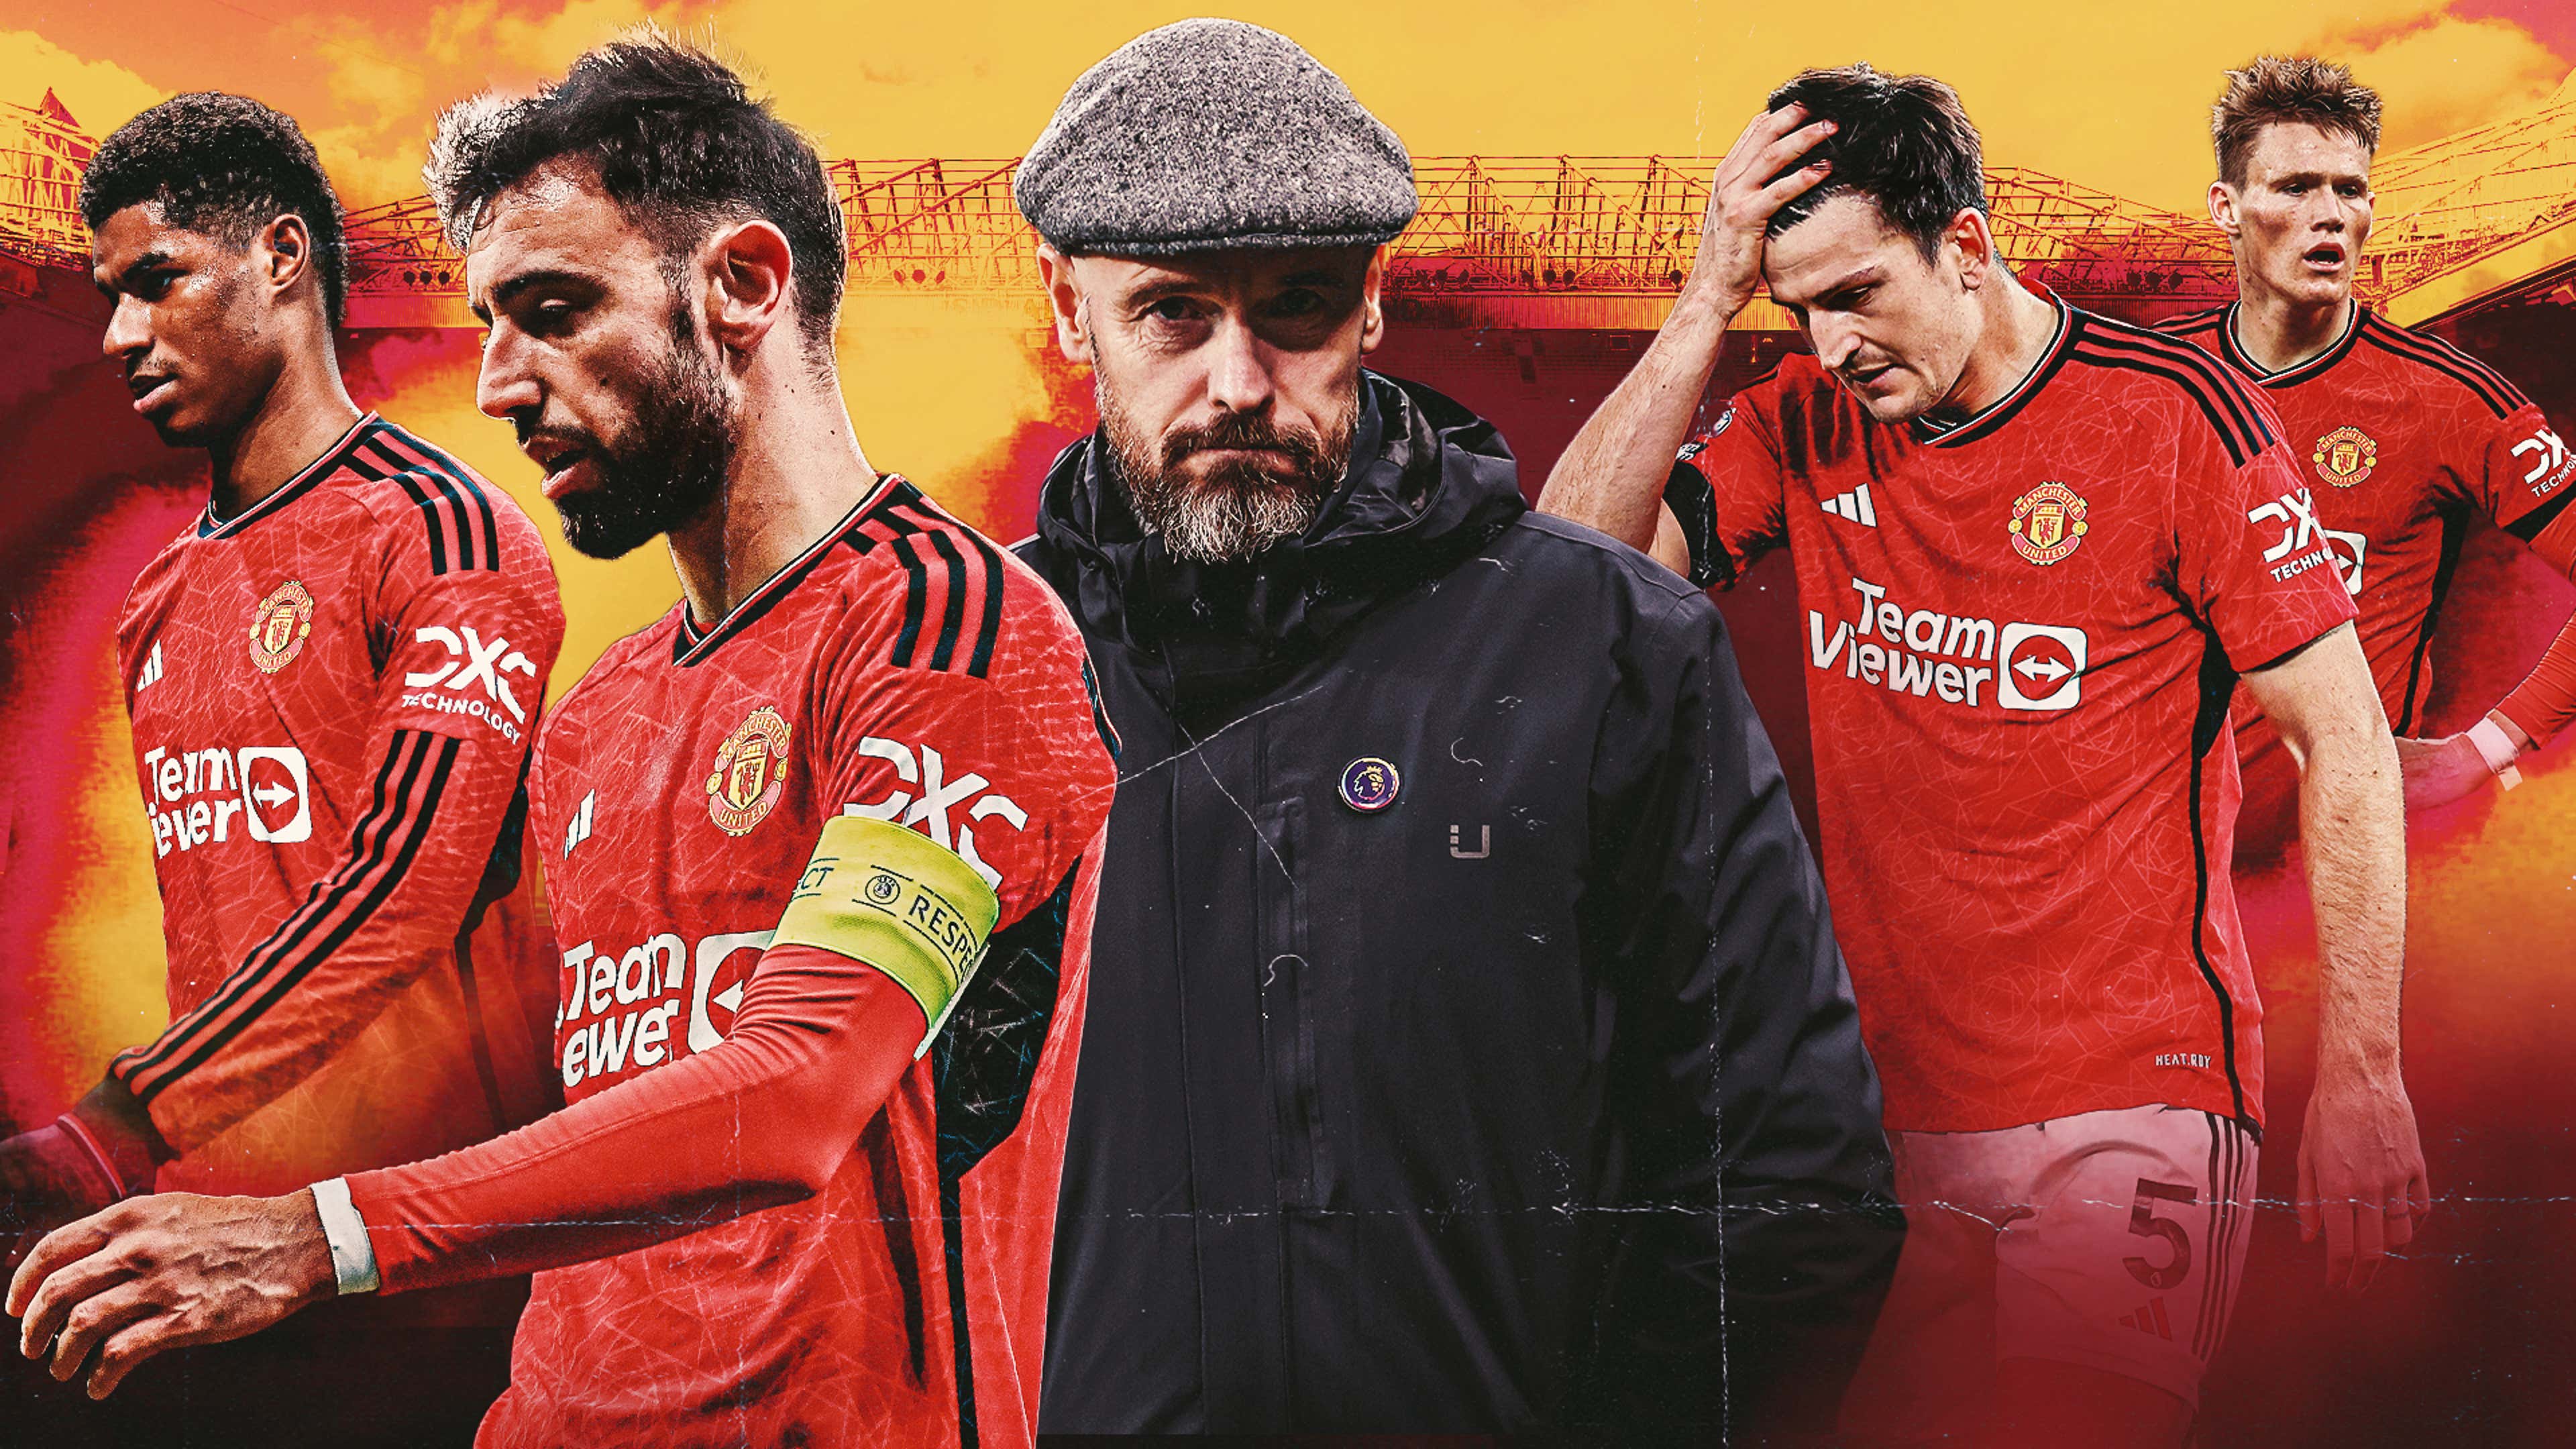 Scraping past the weaker sides, outplayed by the top teams - Man Utd are  destined for mediocrity unless things change | Goal.com US